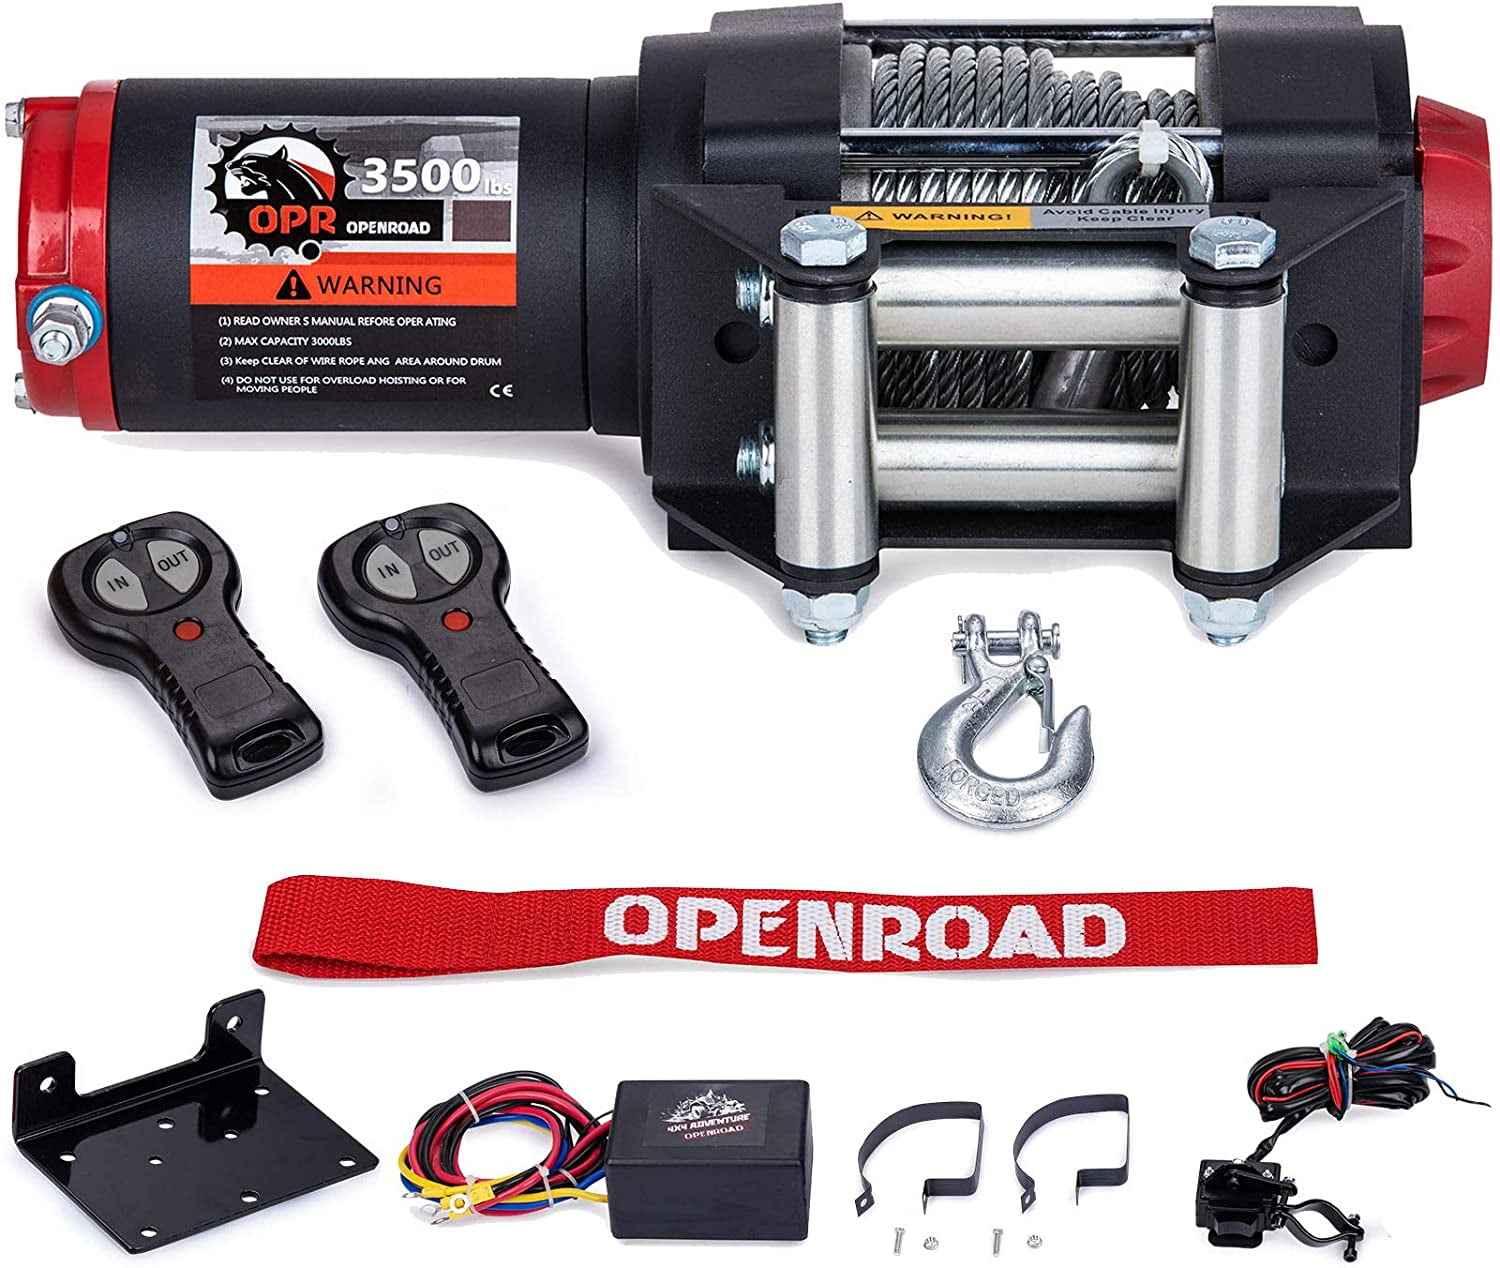 3500LBS/1590kgs Electric atv winch for Jeep UTV Boat with Both Wireless Handheld Remote and Corded Control Recovery Winch 